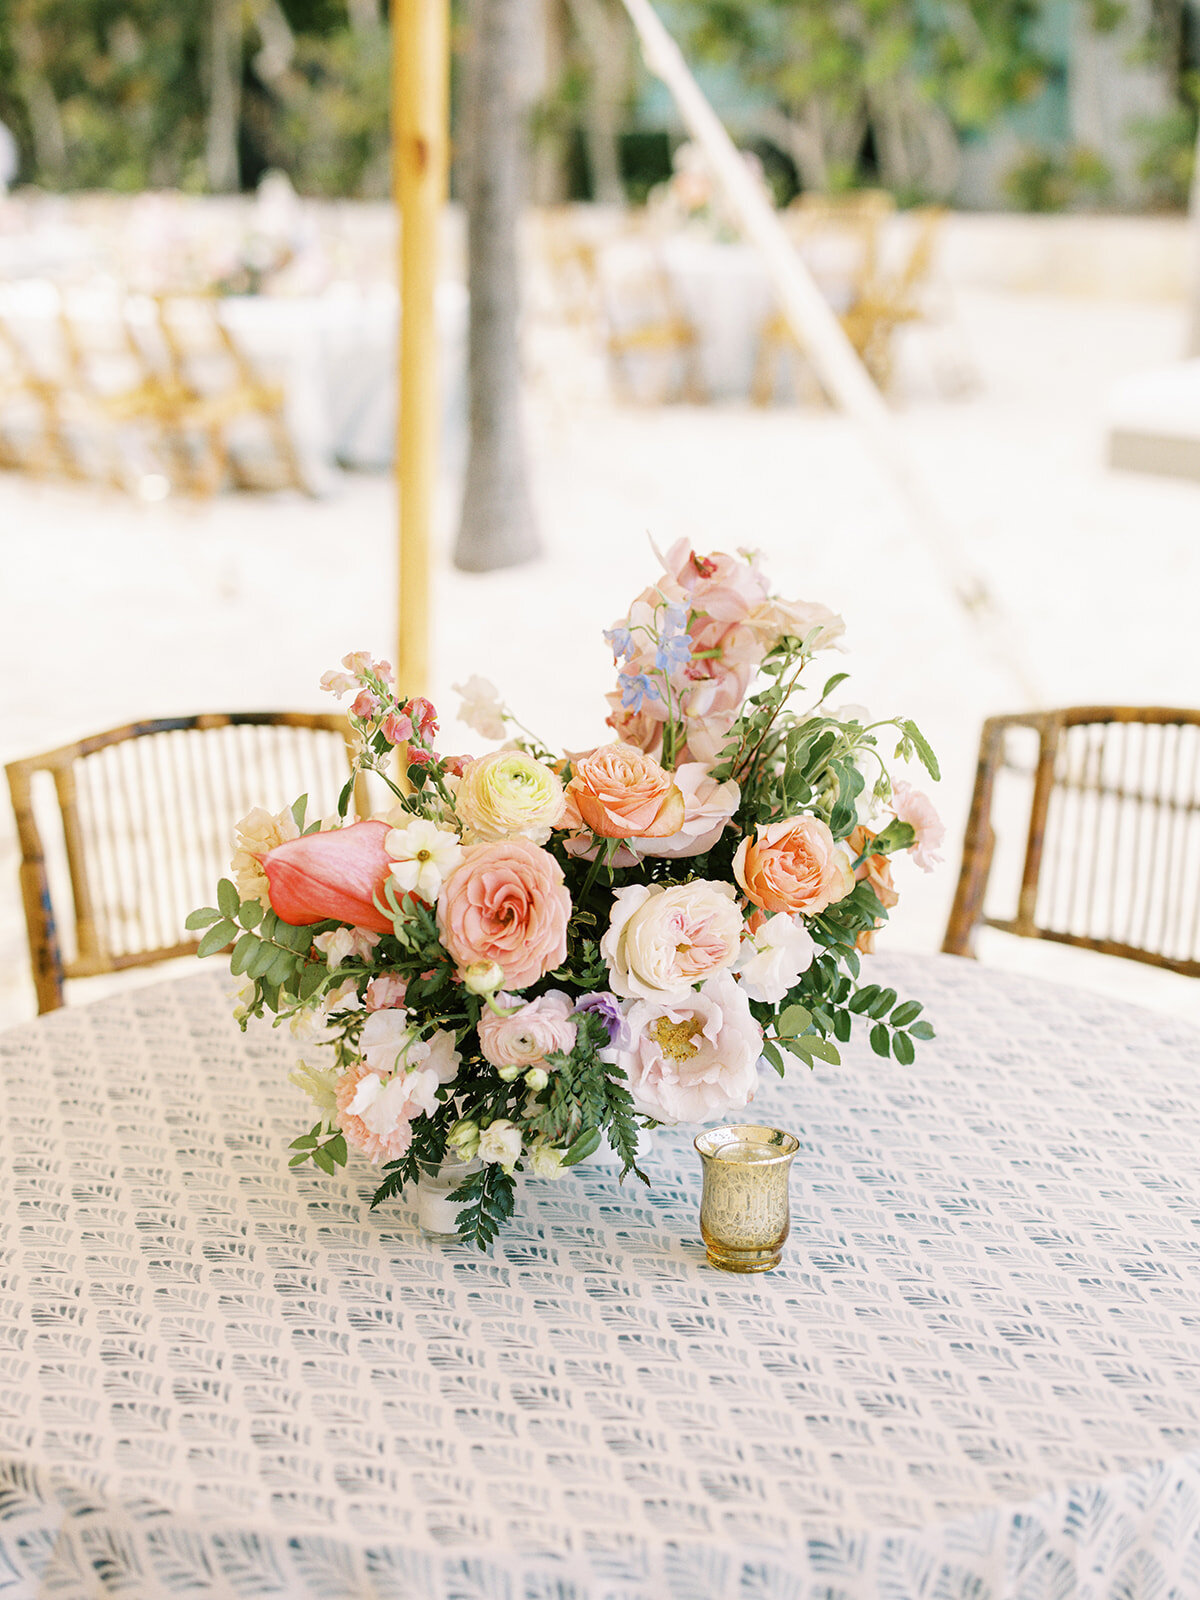 Lush low floral centerpieces for small tables at tropical destination wedding reception. Private estate tented beach wedding in Exuma, Bahamas. Pink, orange, dusty blue, lavender, and natural green flowers. Destination floral design by Rosemary & Finch Floral Design.